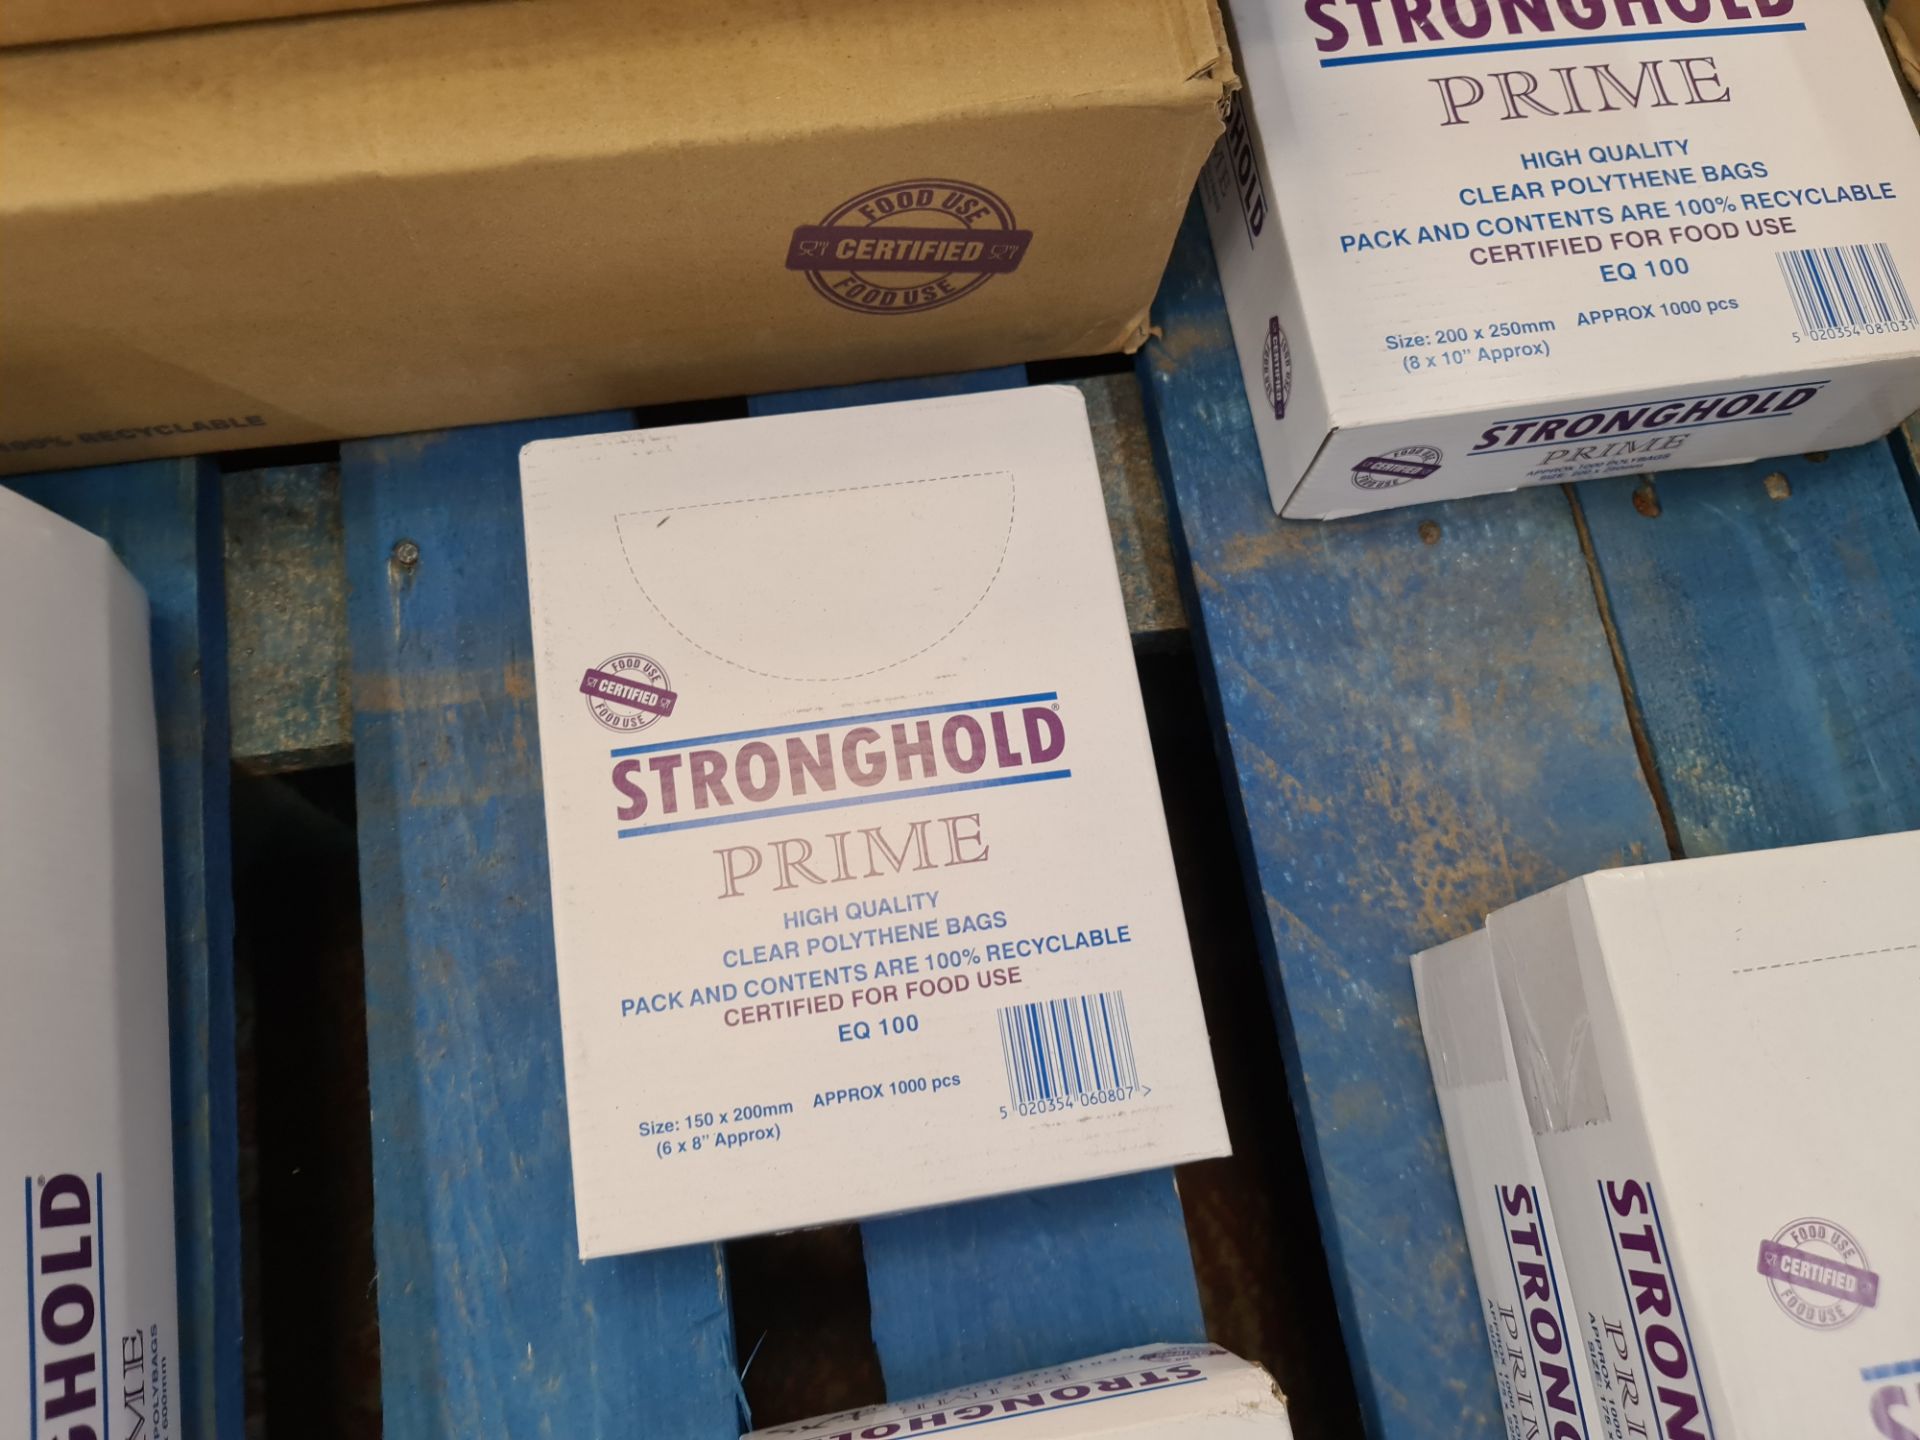 8 assorted sized boxes of Stronghold Prime high quality clear polythene bags in assorted sizes & sty - Image 3 of 6